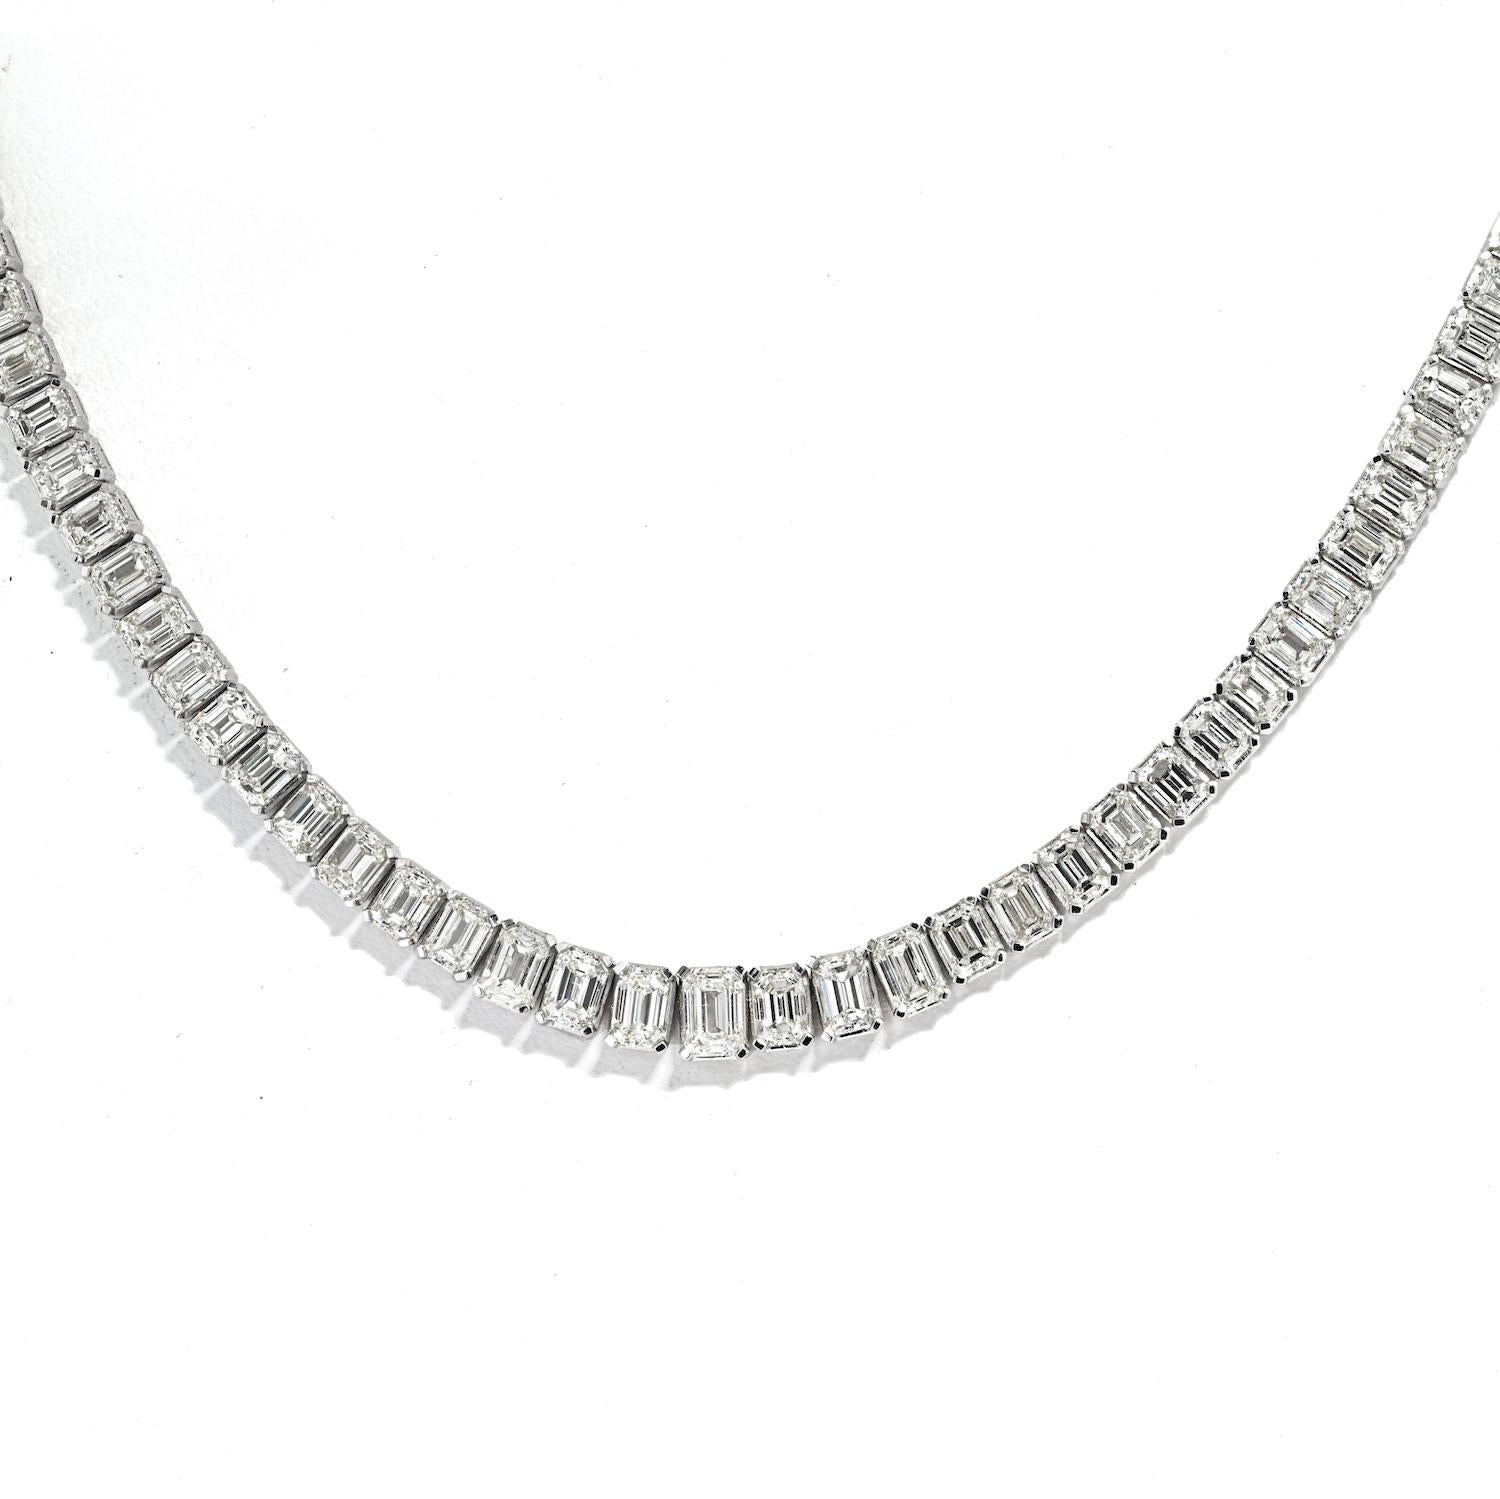 26.00 Carat 18K White Gold Ladies Emerald Cut Diamond Tennis Necklace In Excellent Condition For Sale In New York, NY